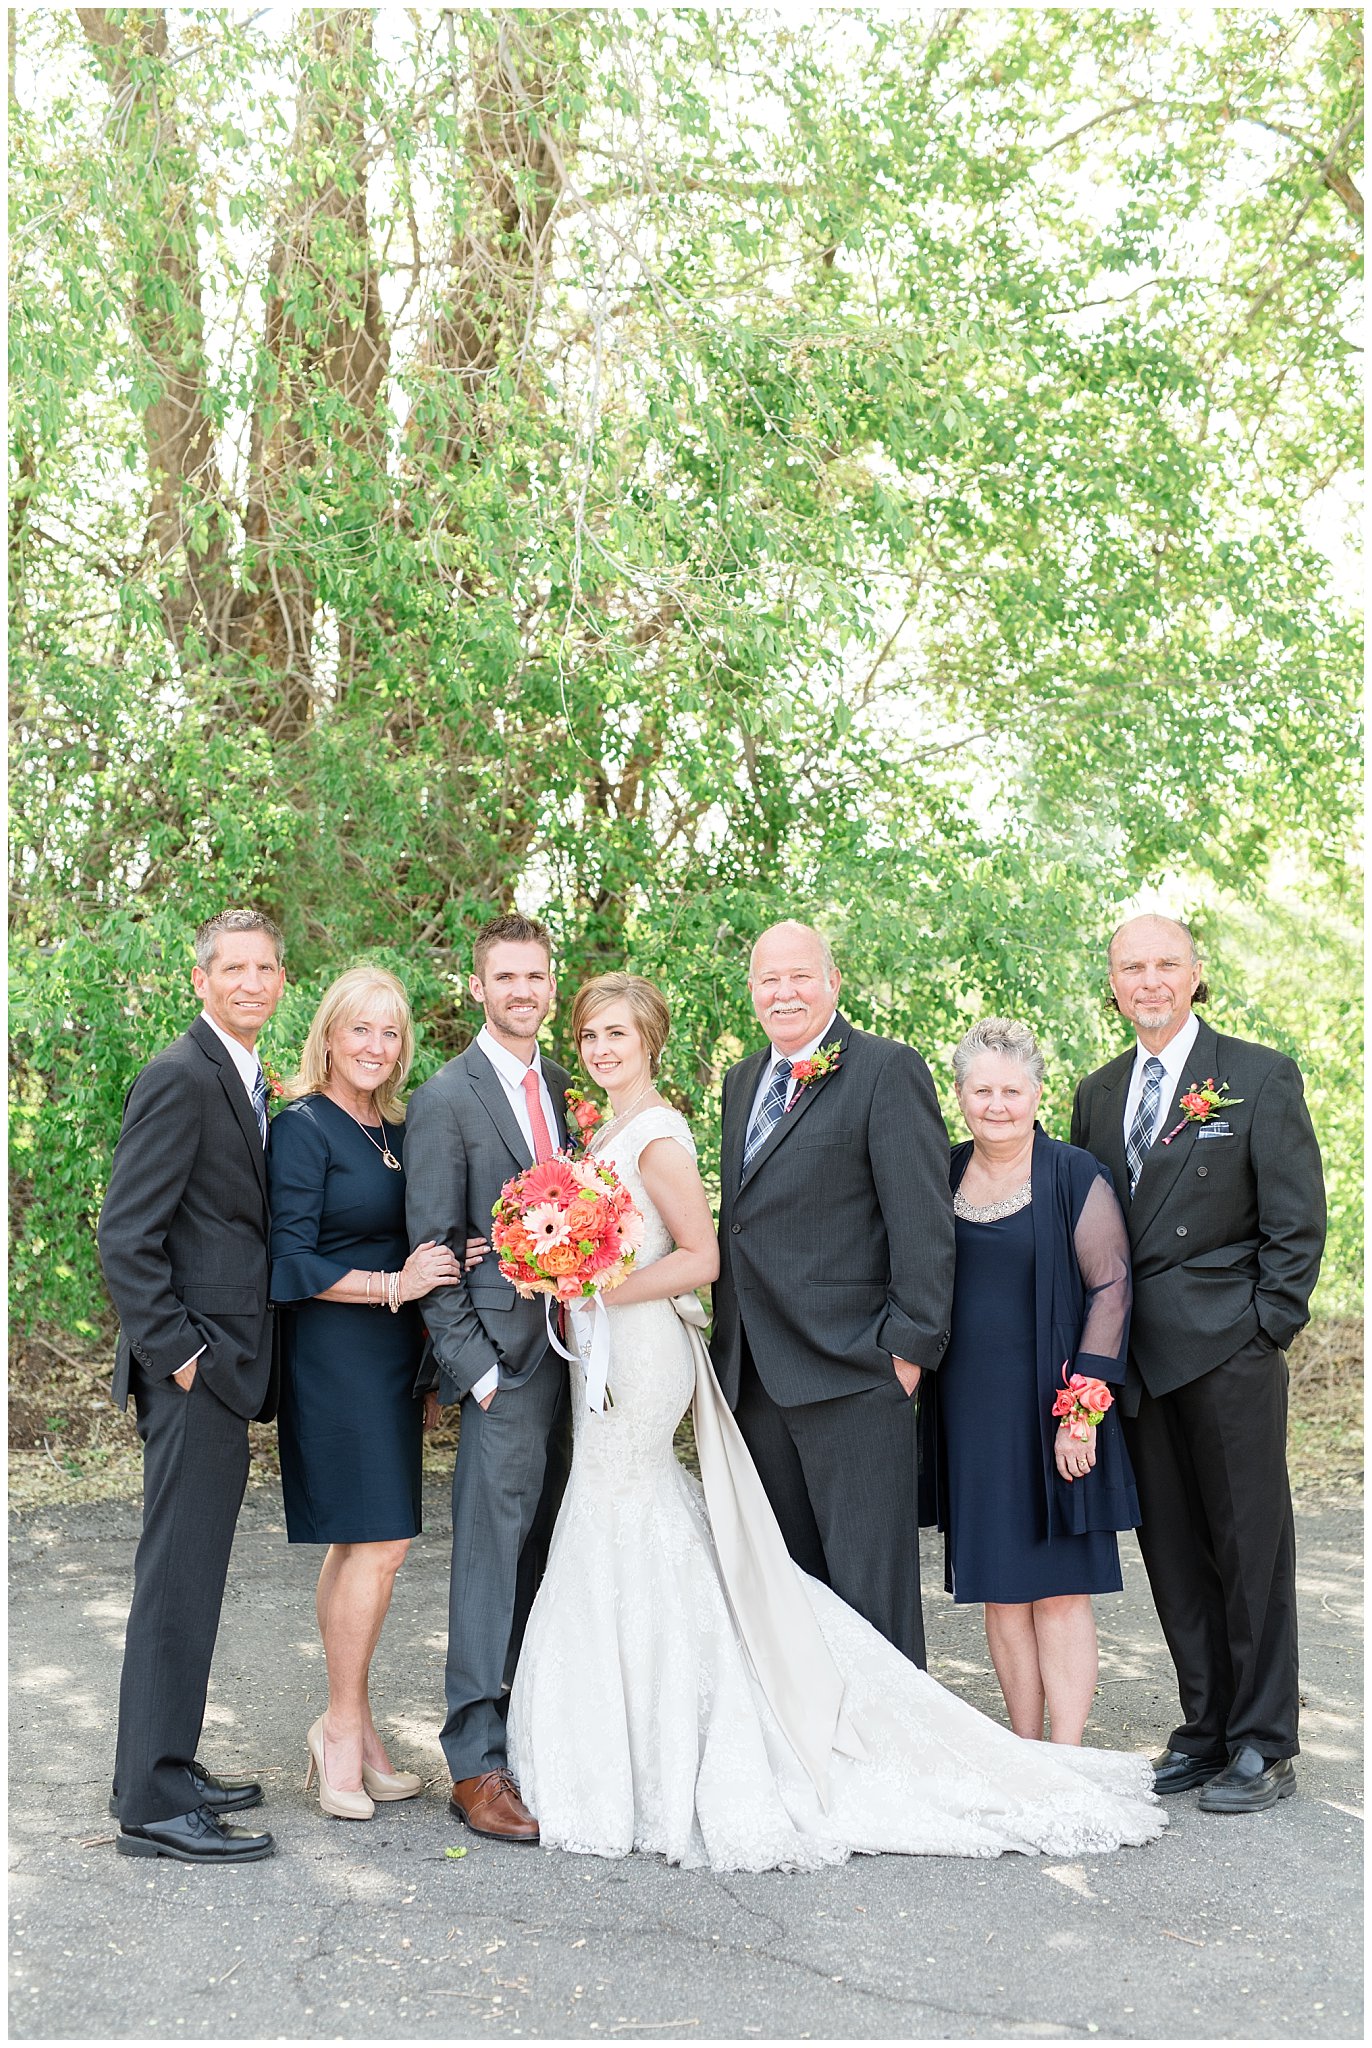 Salt Lake wedding | Family reception pictures | coral and grey wedding